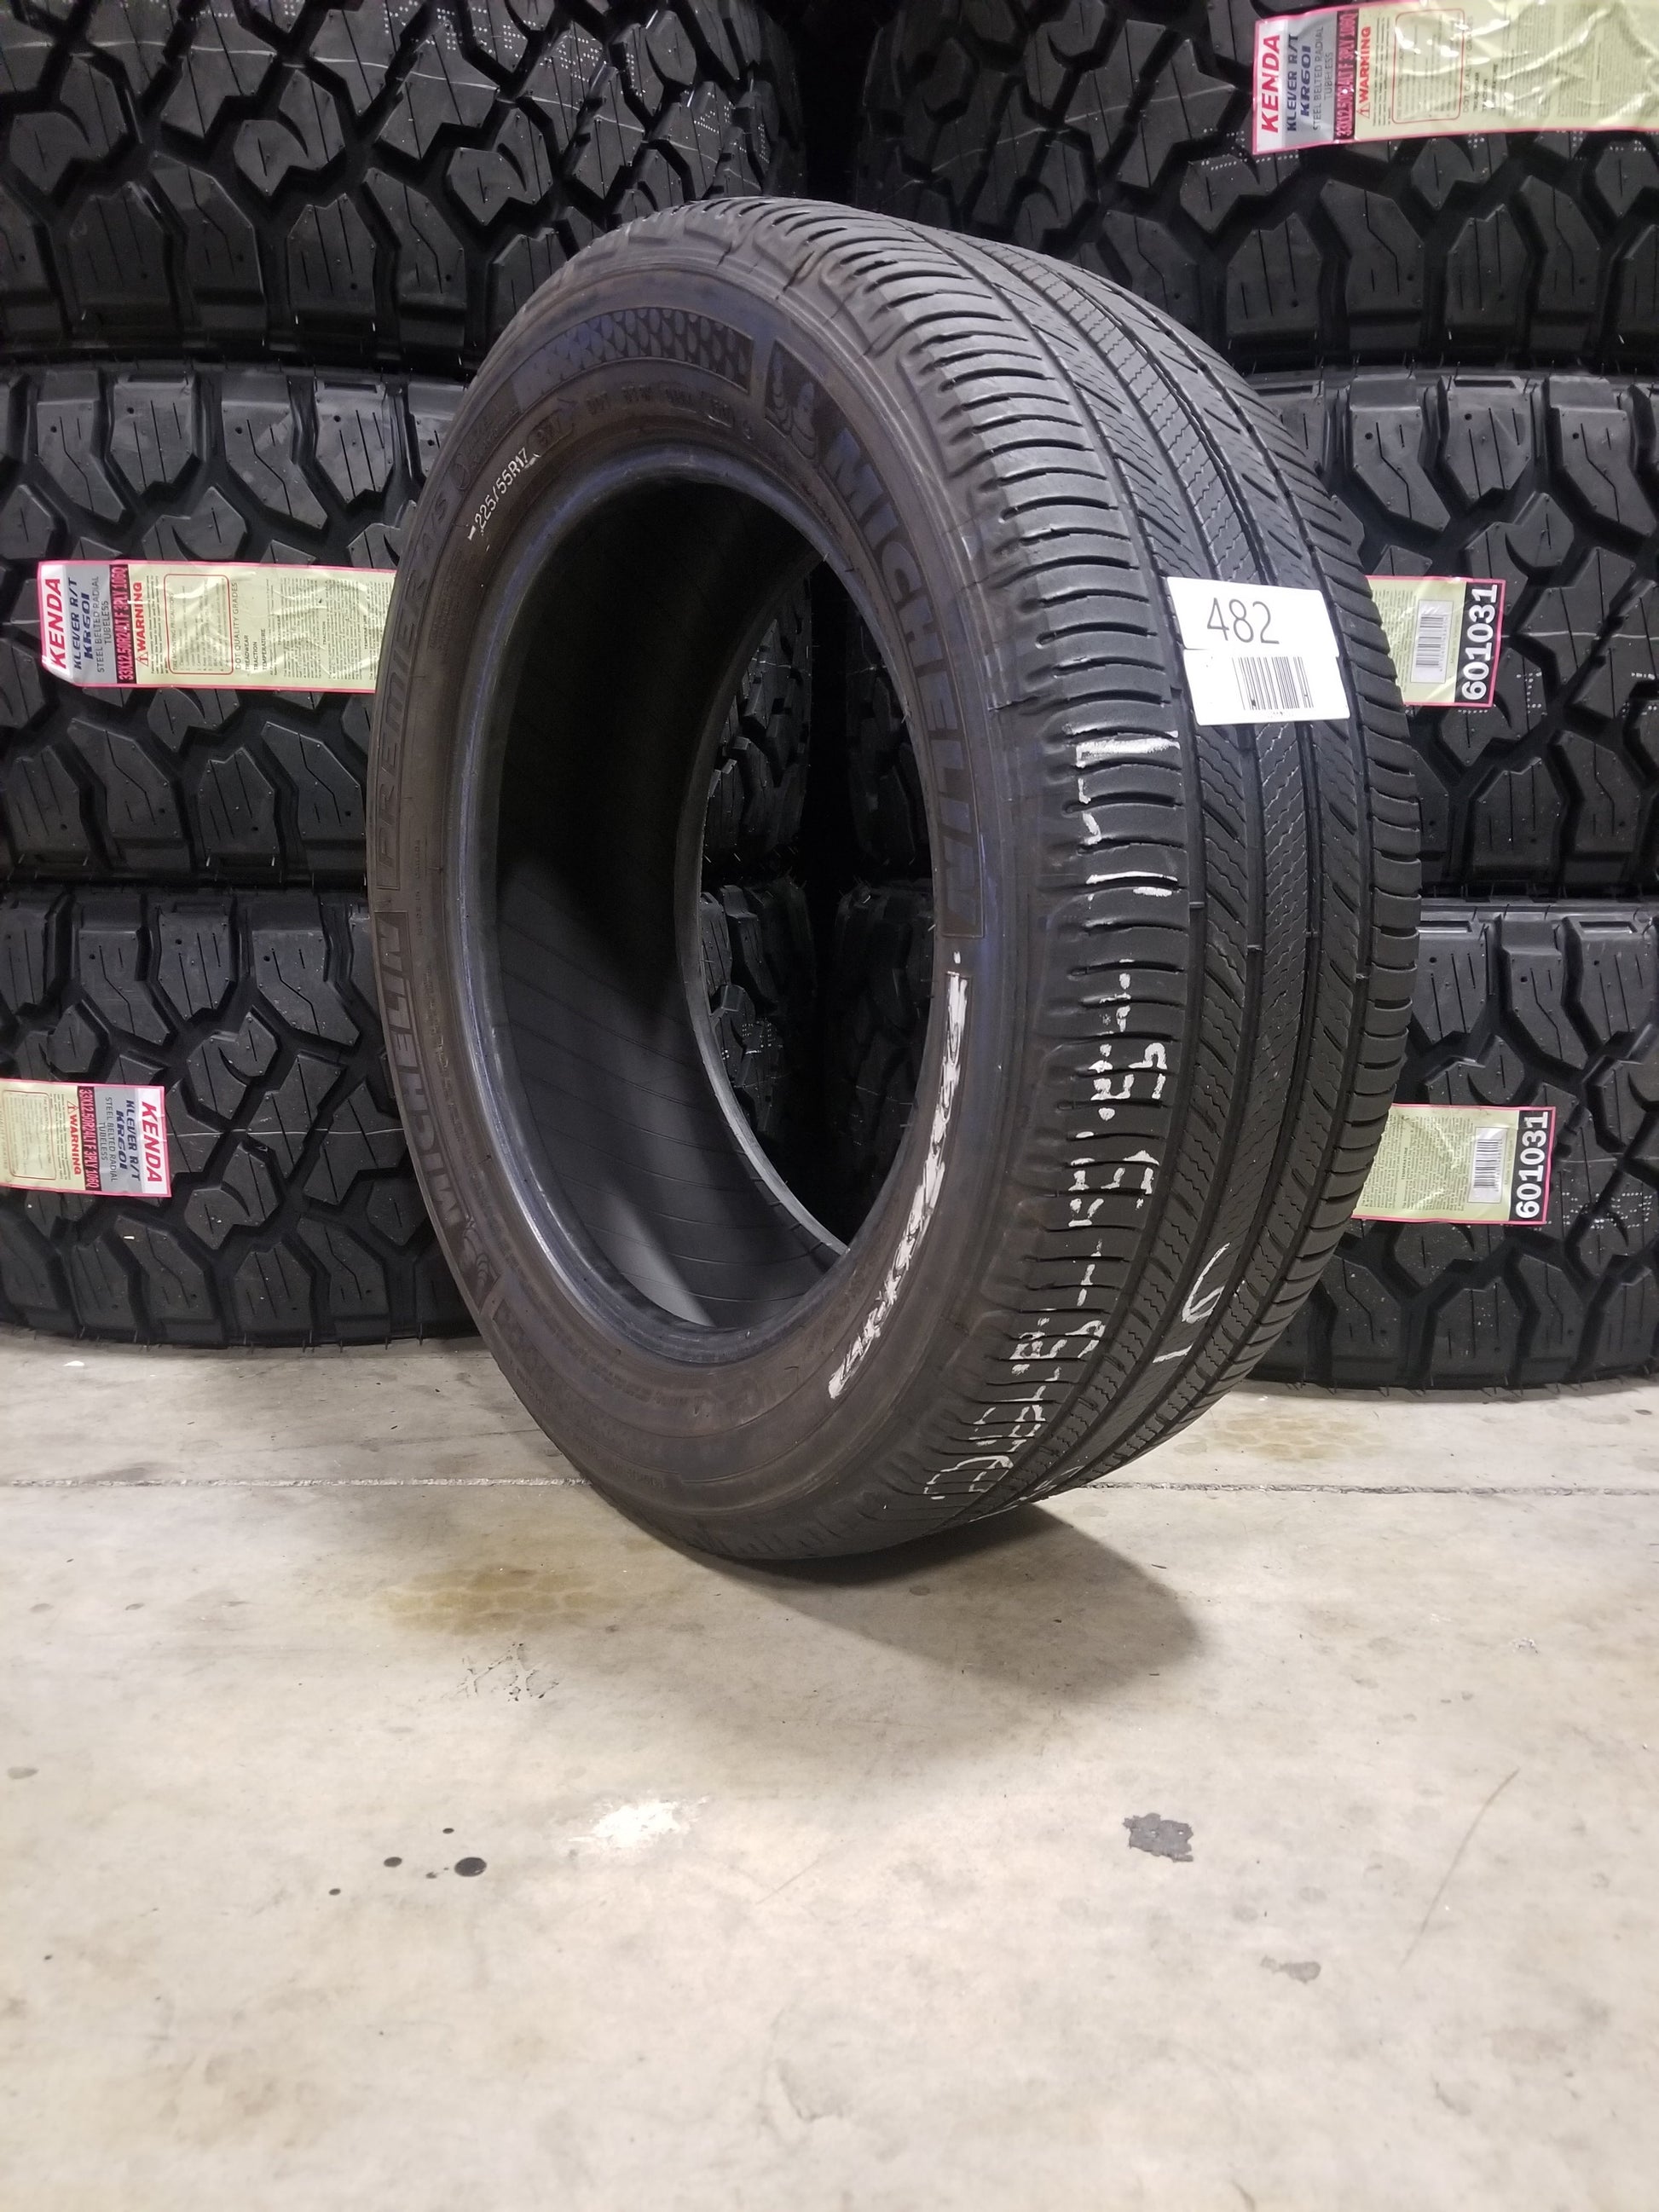 SINGLE 225/55R17 Michelin Premier A/S 97 V 1609 LBS - Used Tires